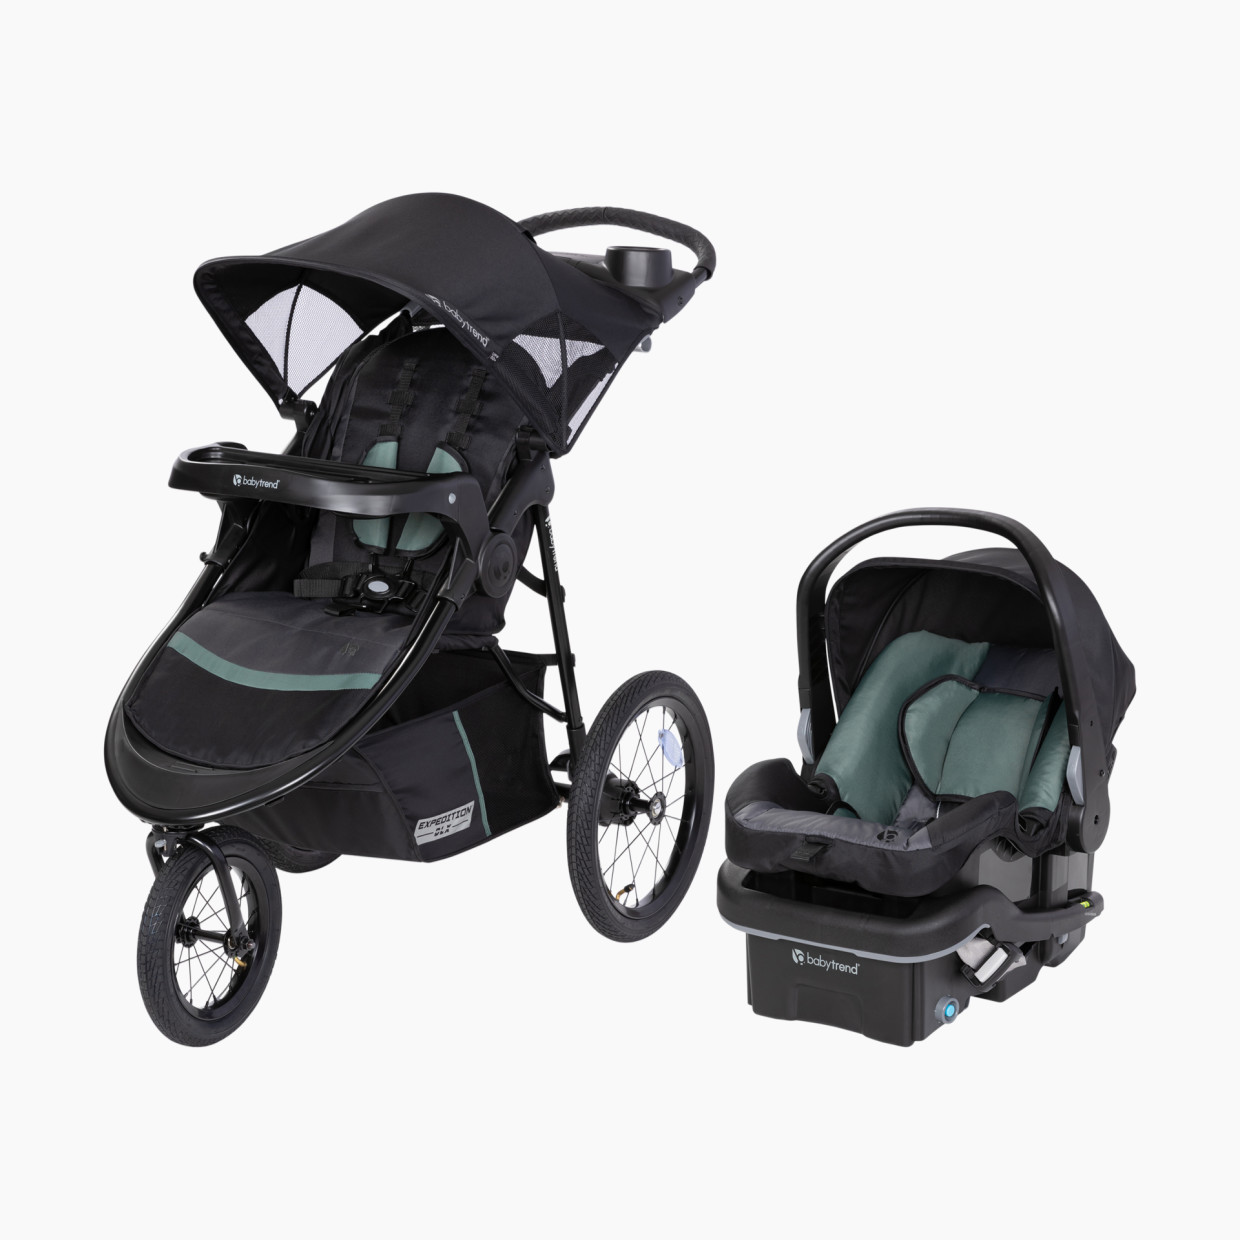 Baby Trend Expedition DLX Jogger Travel System - Dash Sage.